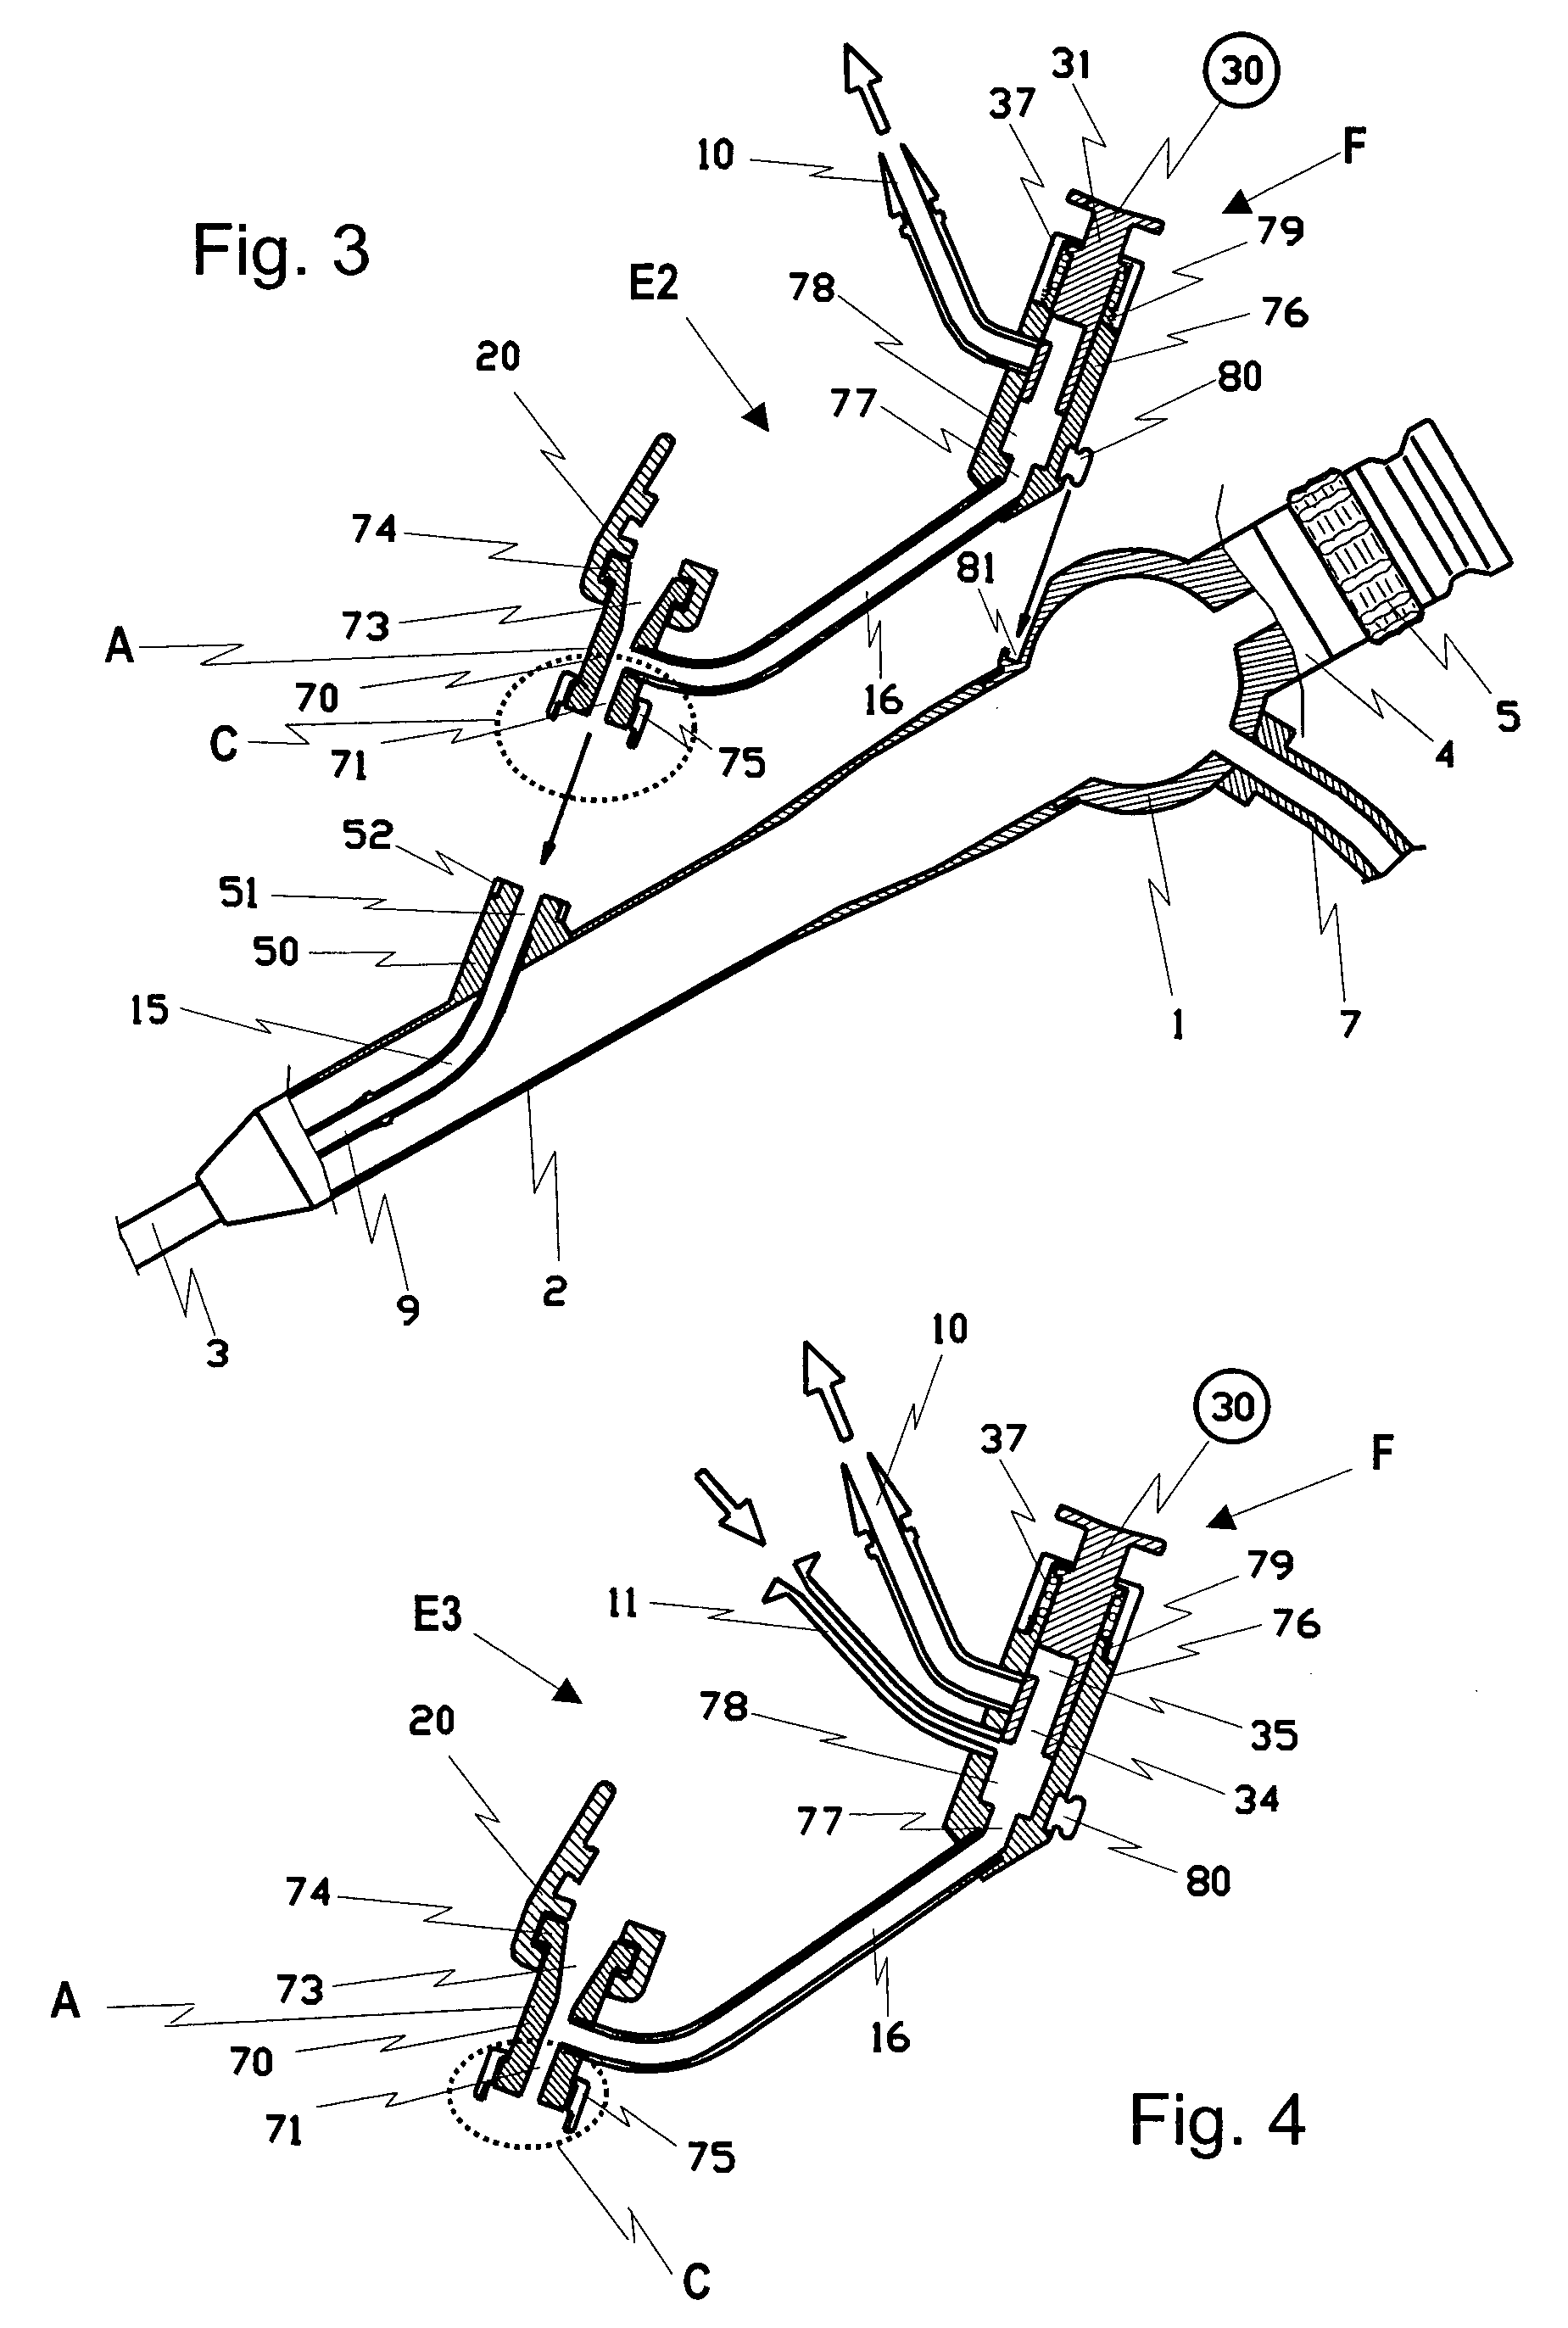 Removable operating device for a flexible endoscopic probe for medical purposes